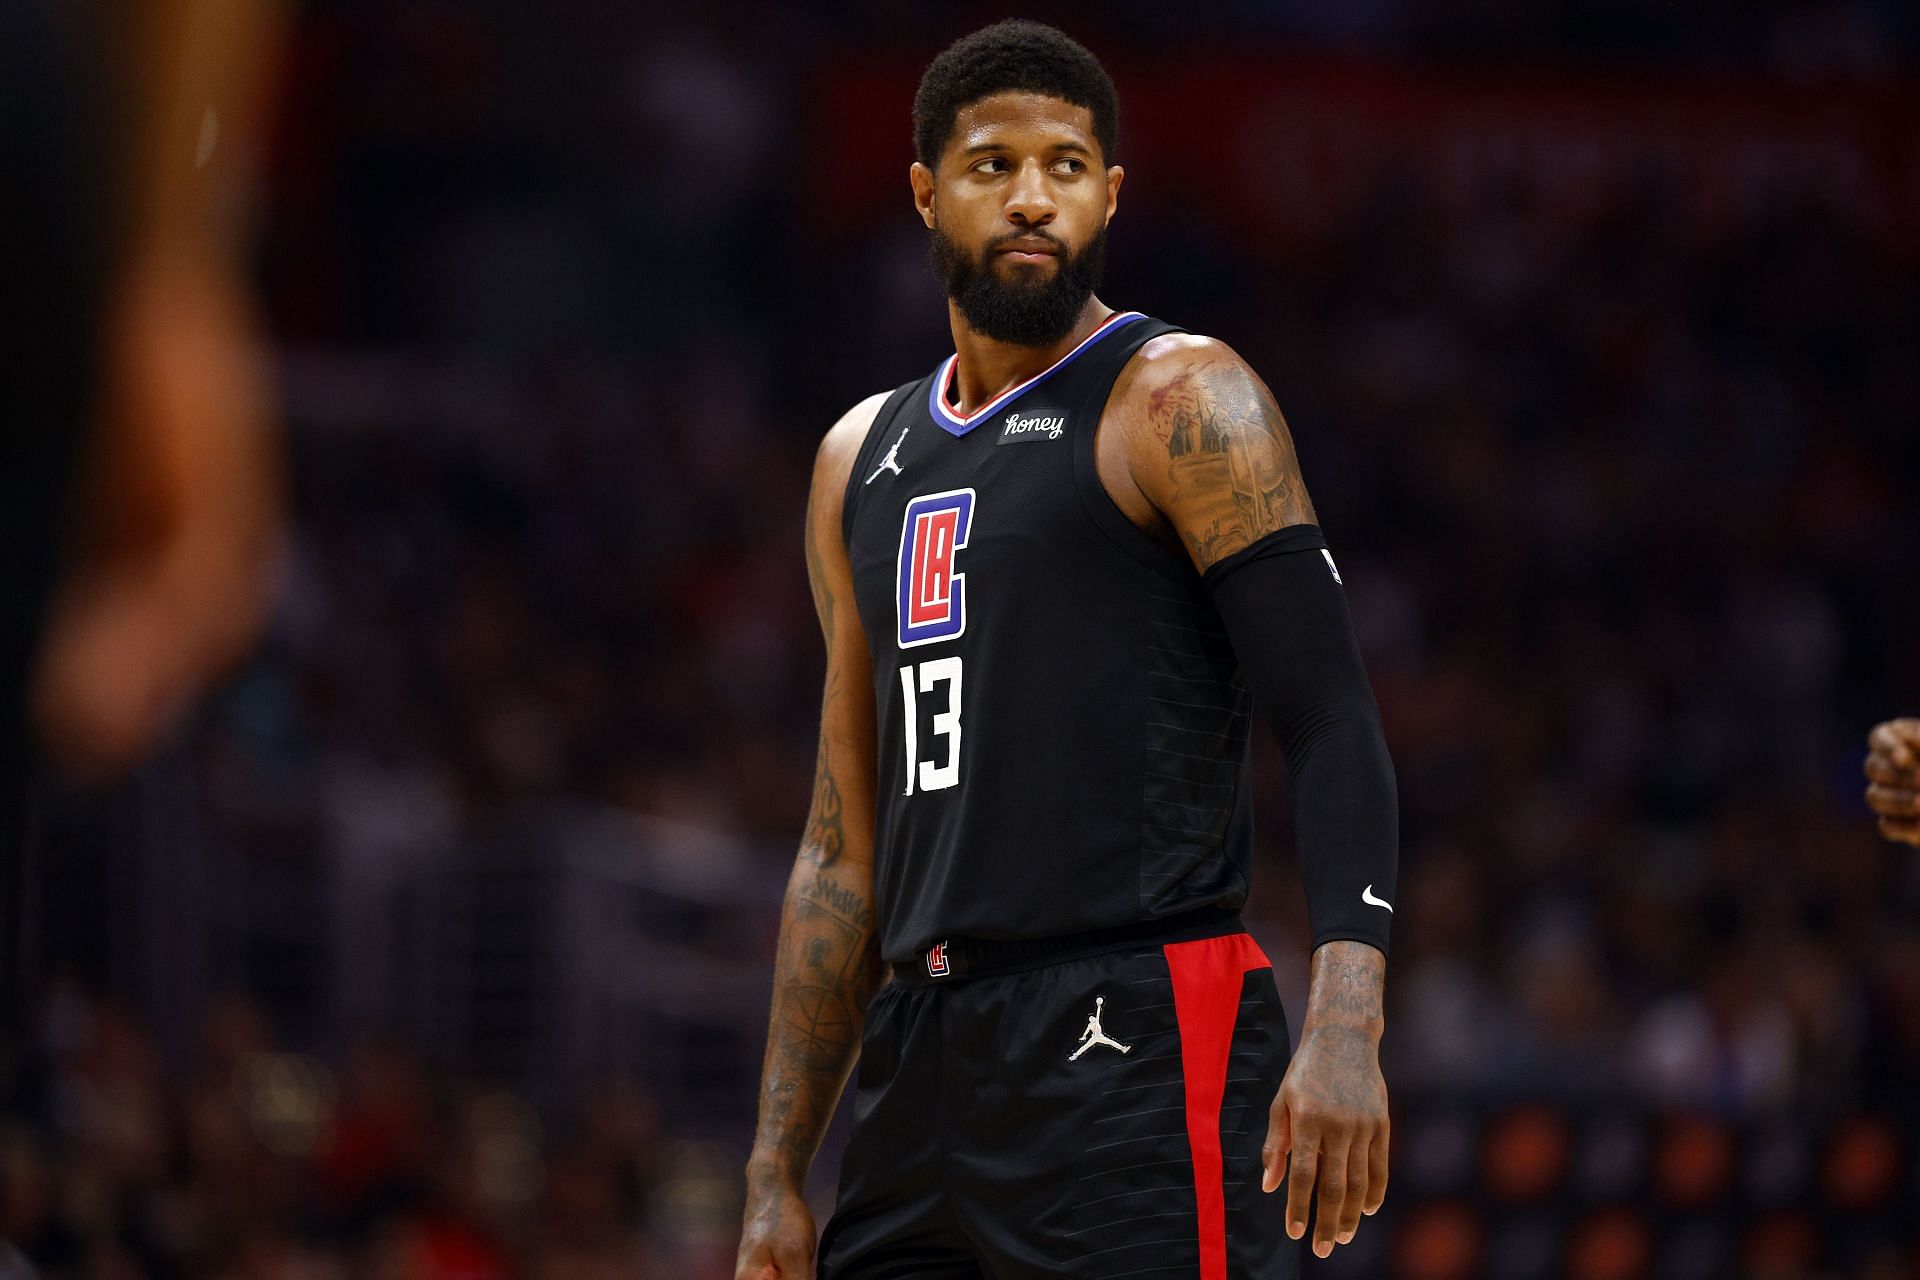 Paul George is bound to go off in London against the Nuggets.